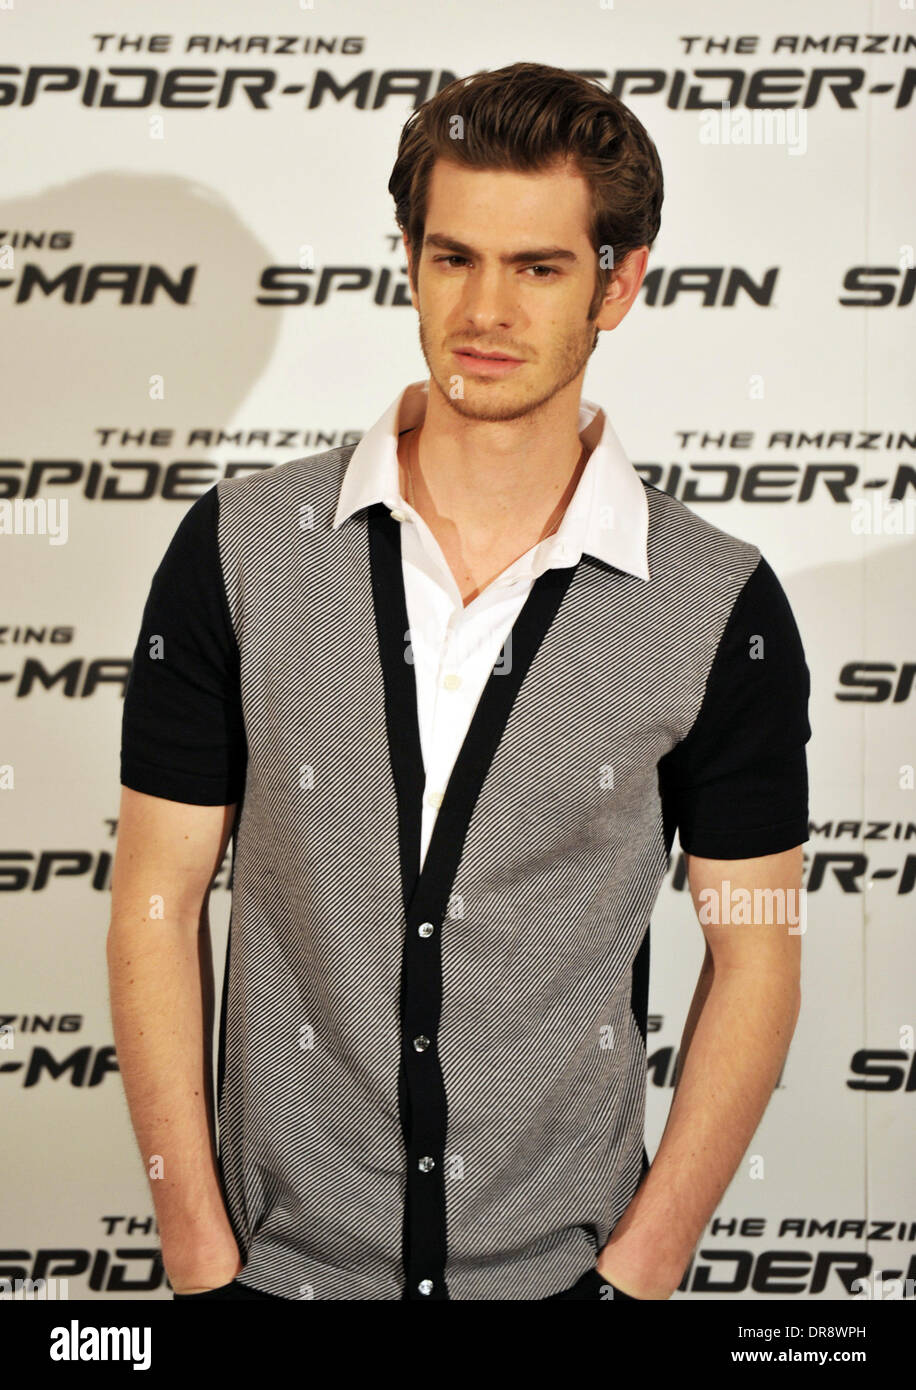 Andrew Garfield 'The Amazing Spider-Man' photocall held at Hotel St. Regis Rome, Italy - 22.0612 Stock Photo